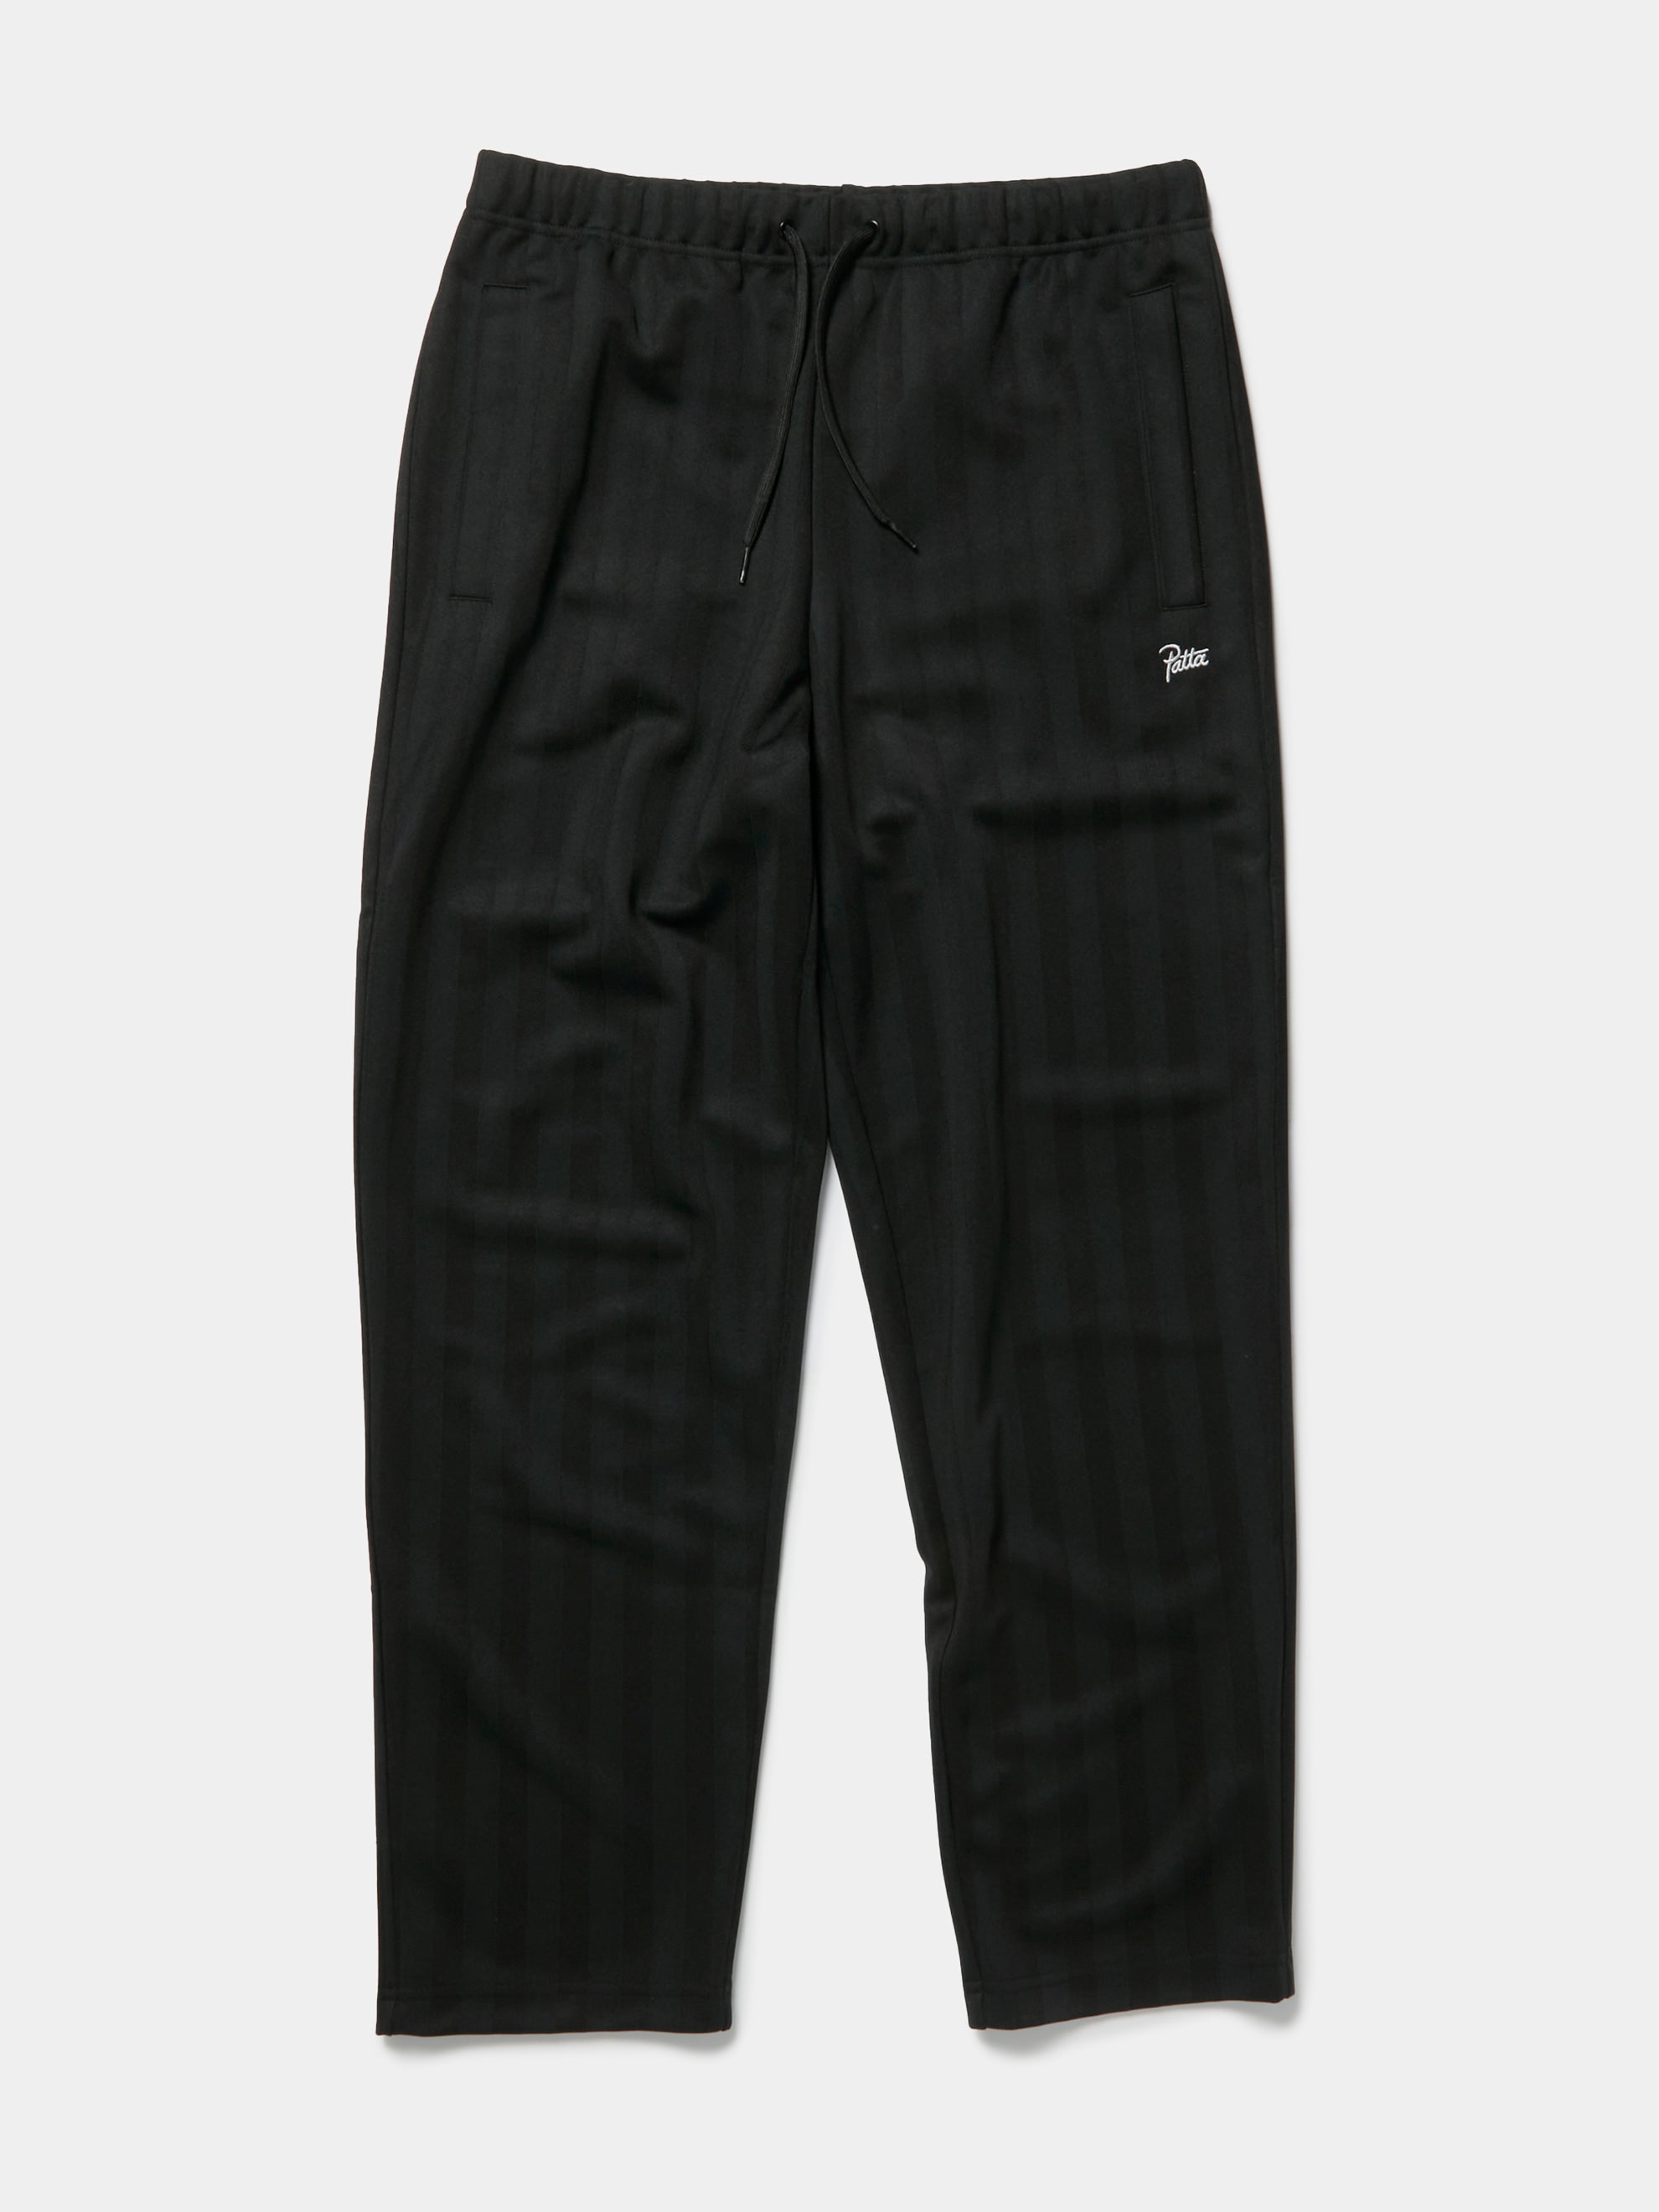 Buy Patta TRICOT STRIPE TRACK PANTS Online at UNION LOS ANGELES